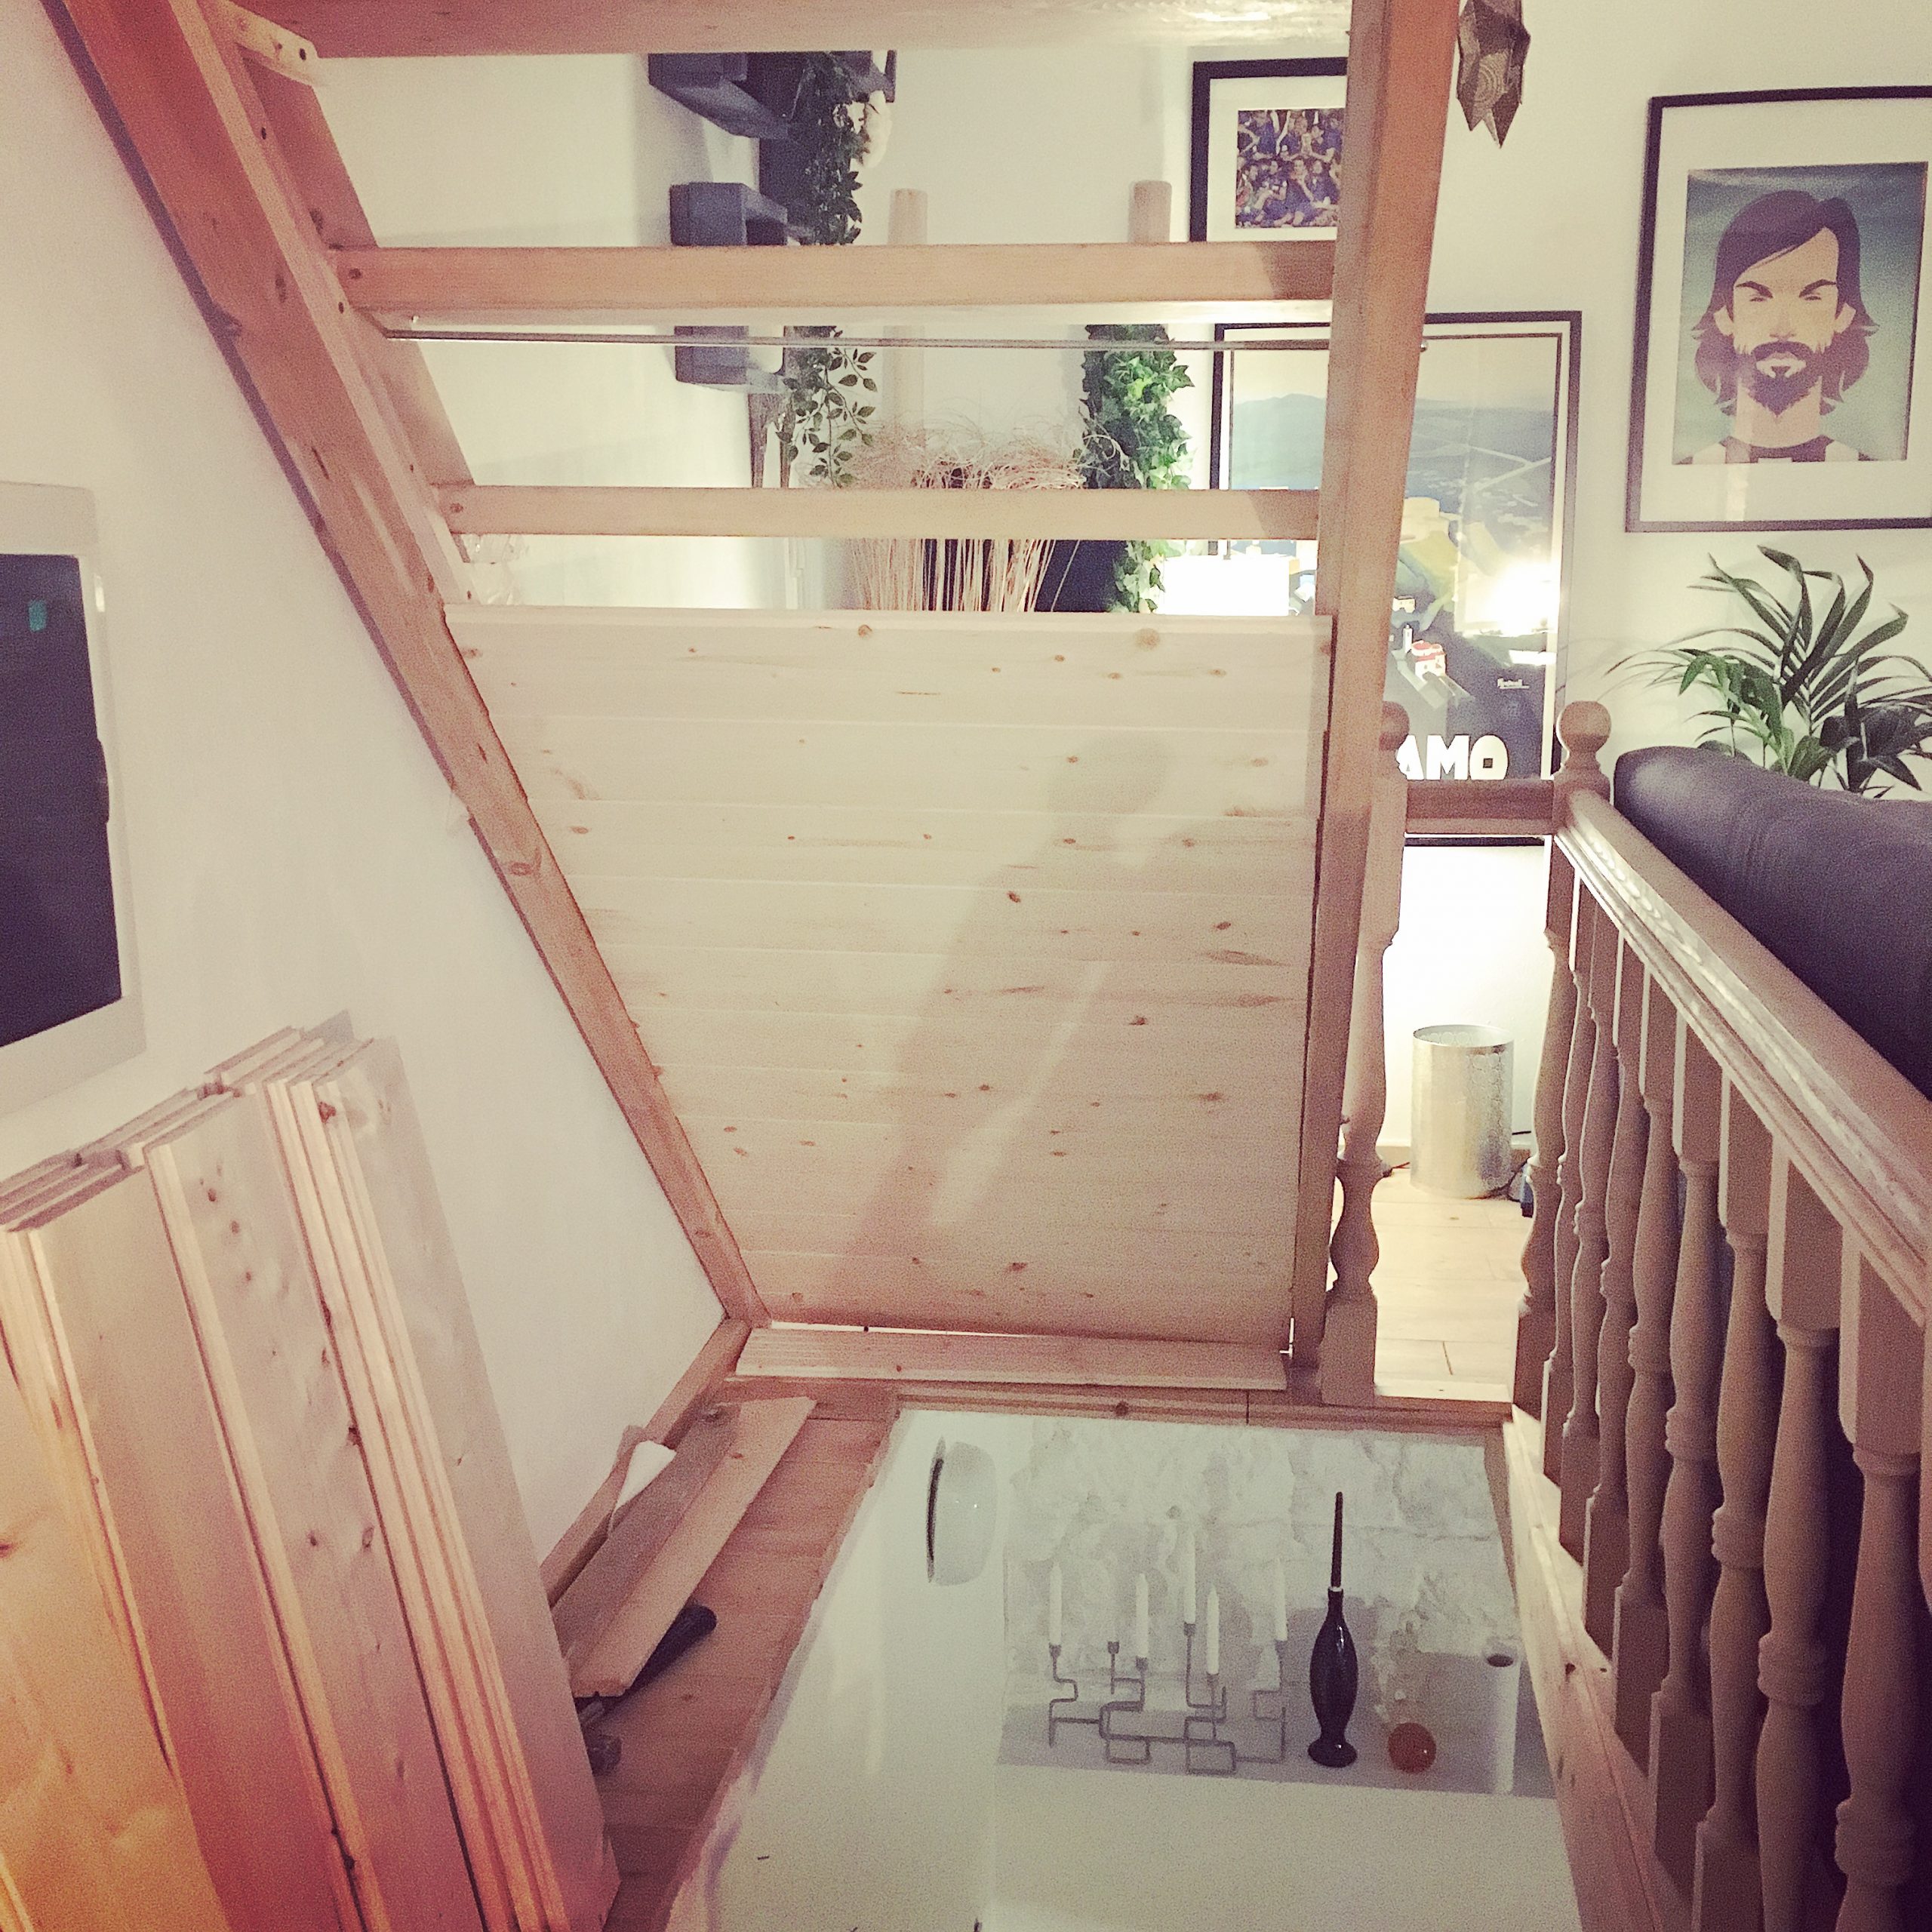 Wooden boards attached to the back of the stairs, so that they are no longer open and exposed, and are beginning to already feel a whole lot safer...